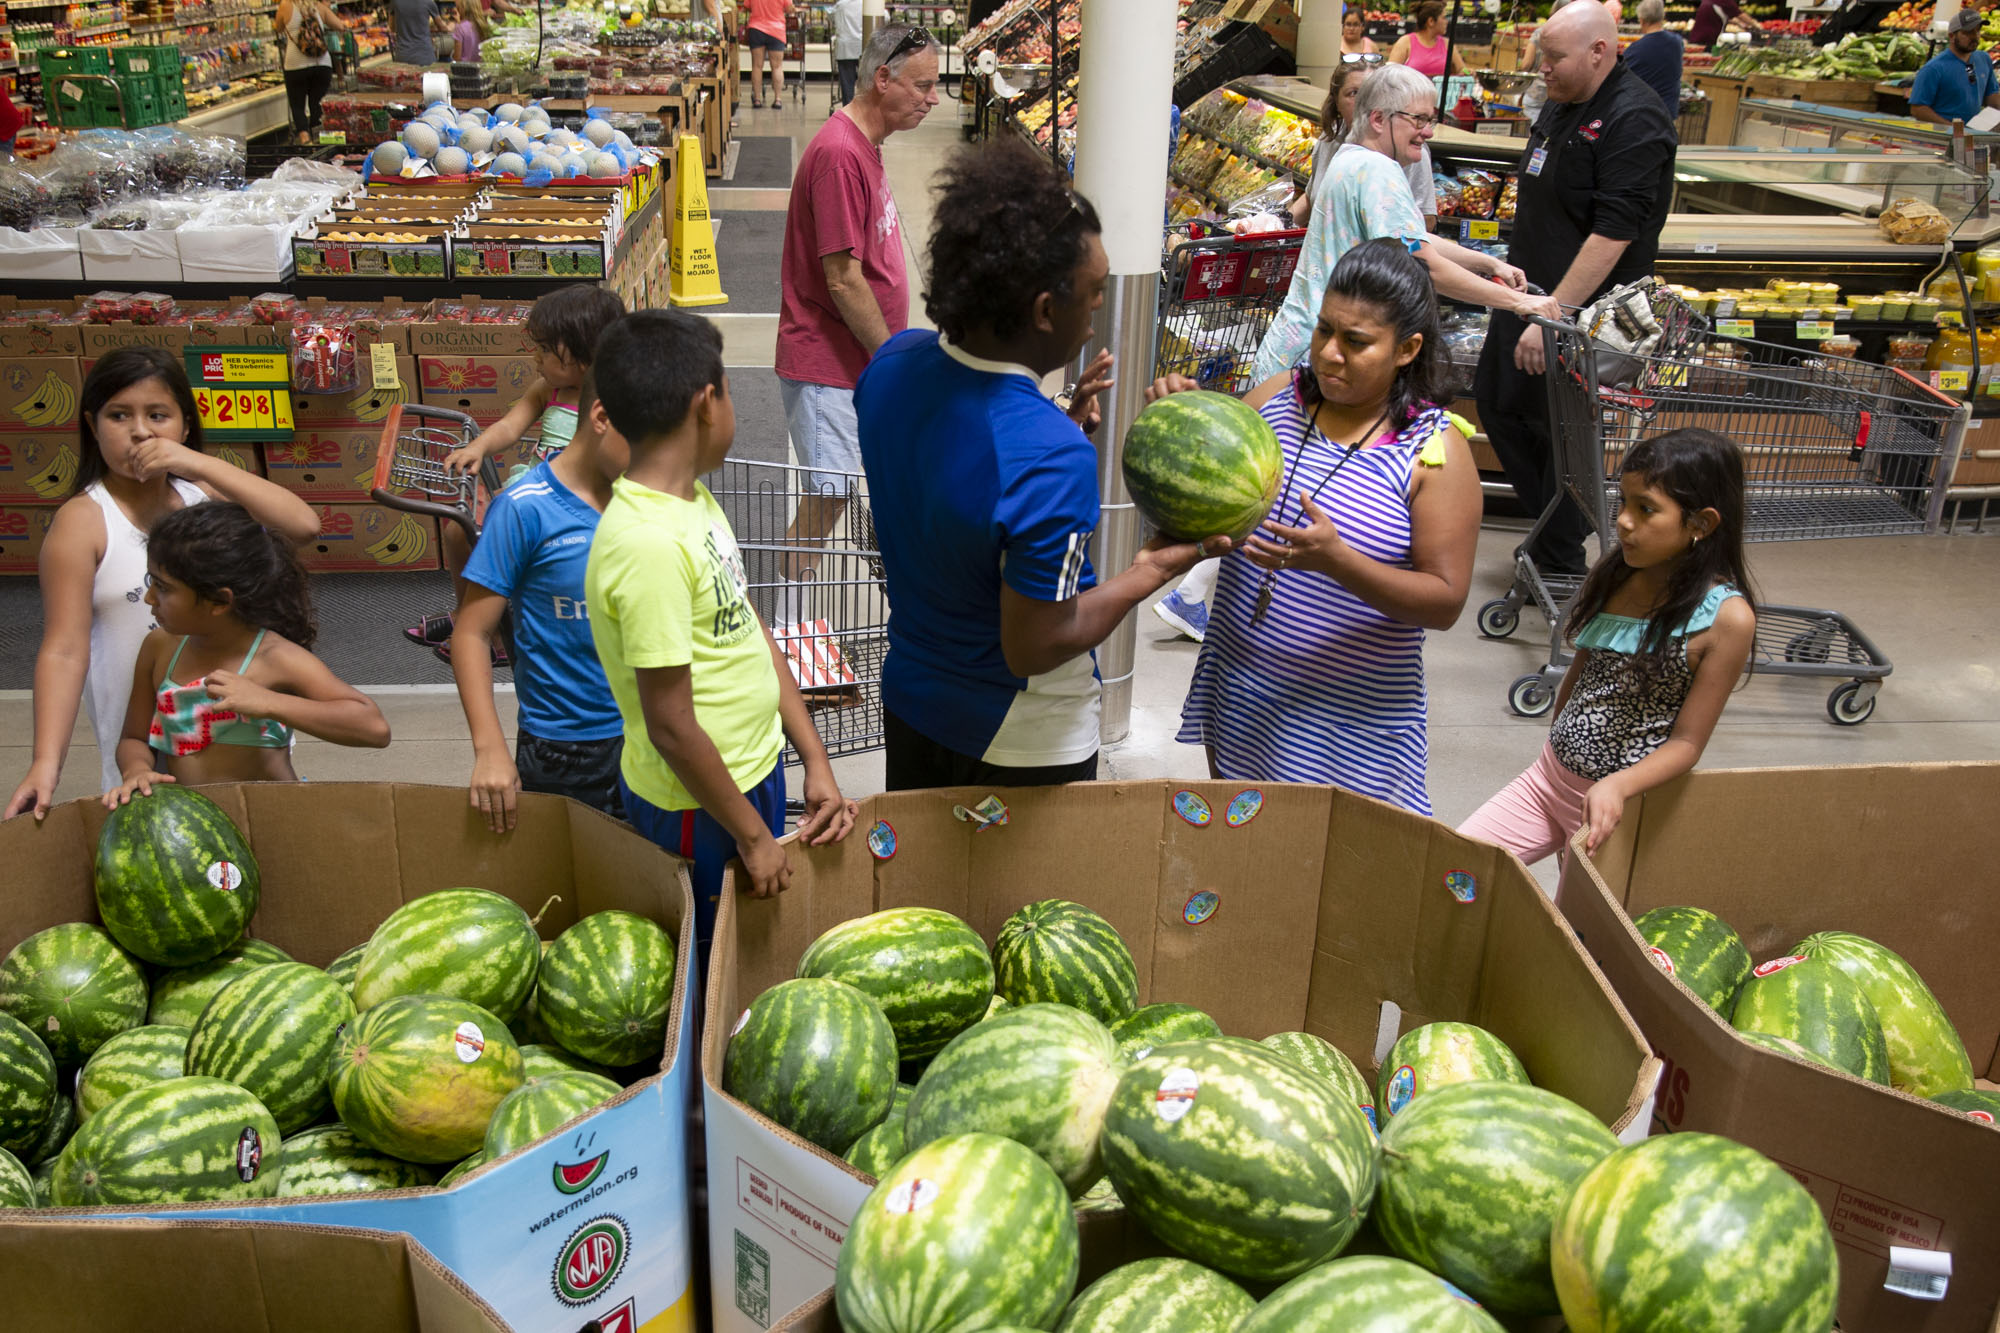  Rosales shops at an H-E-B grocery store with family members in Kyle, Texas. “It’s the only store I’ve been able to find that reminds me of home,” she said. “The produce is as rich and as fresh as the kinds we have in Honduras.” 